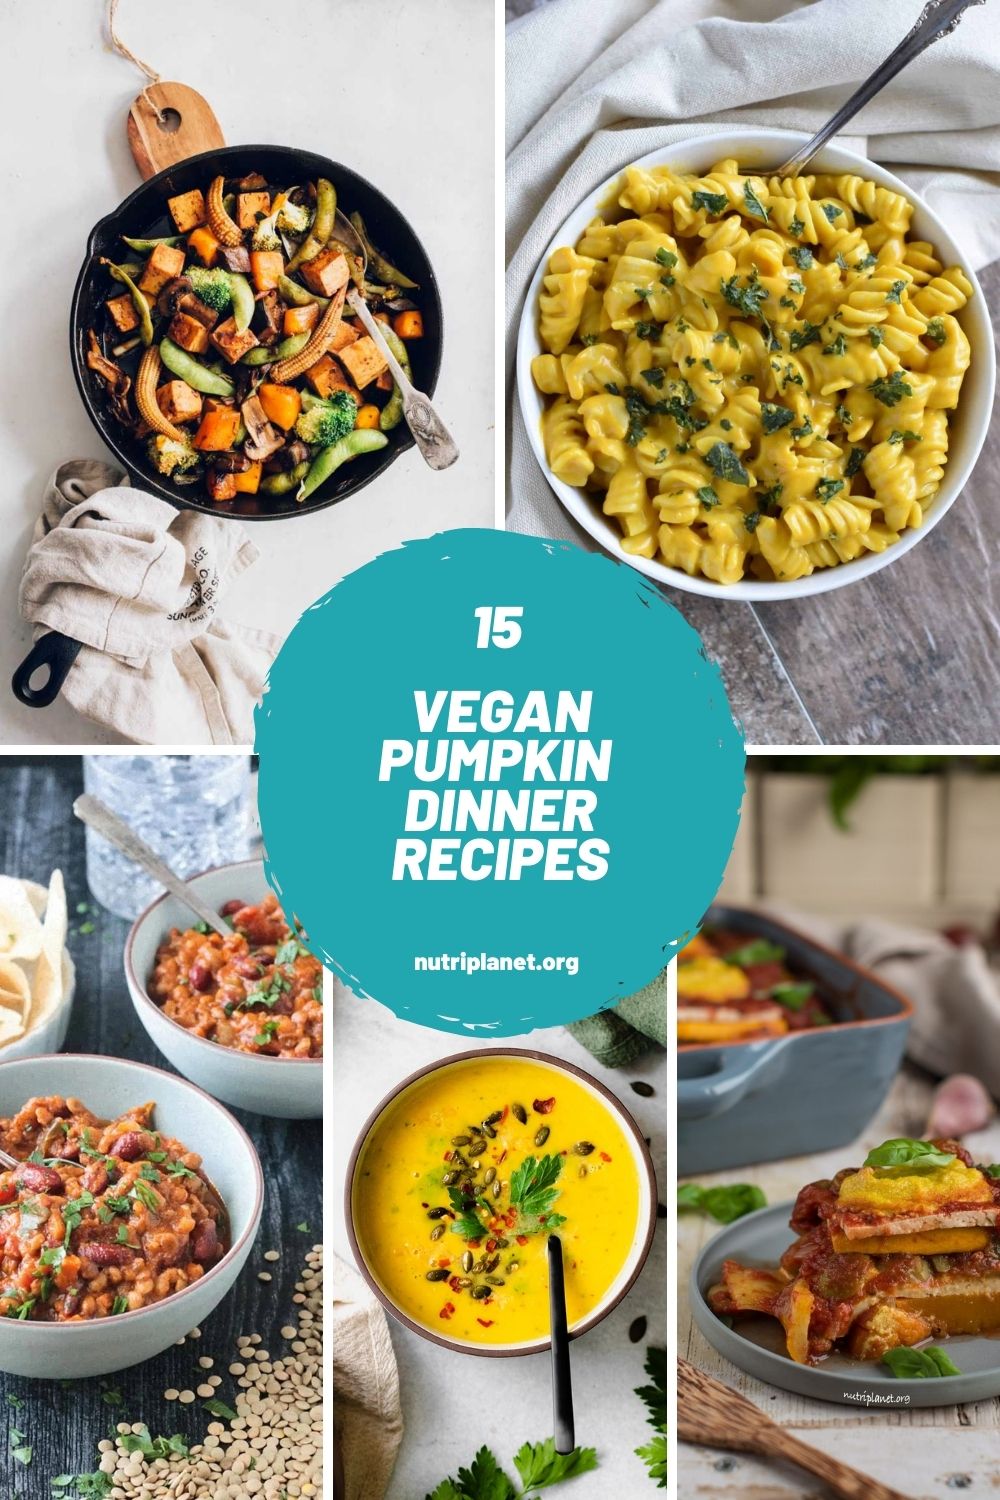 Learn how to make healthy vegan pumpkin dinner recipes. From pumpkin curry, soups, and stews to pumpkin pasta, stir fry and pasta. 